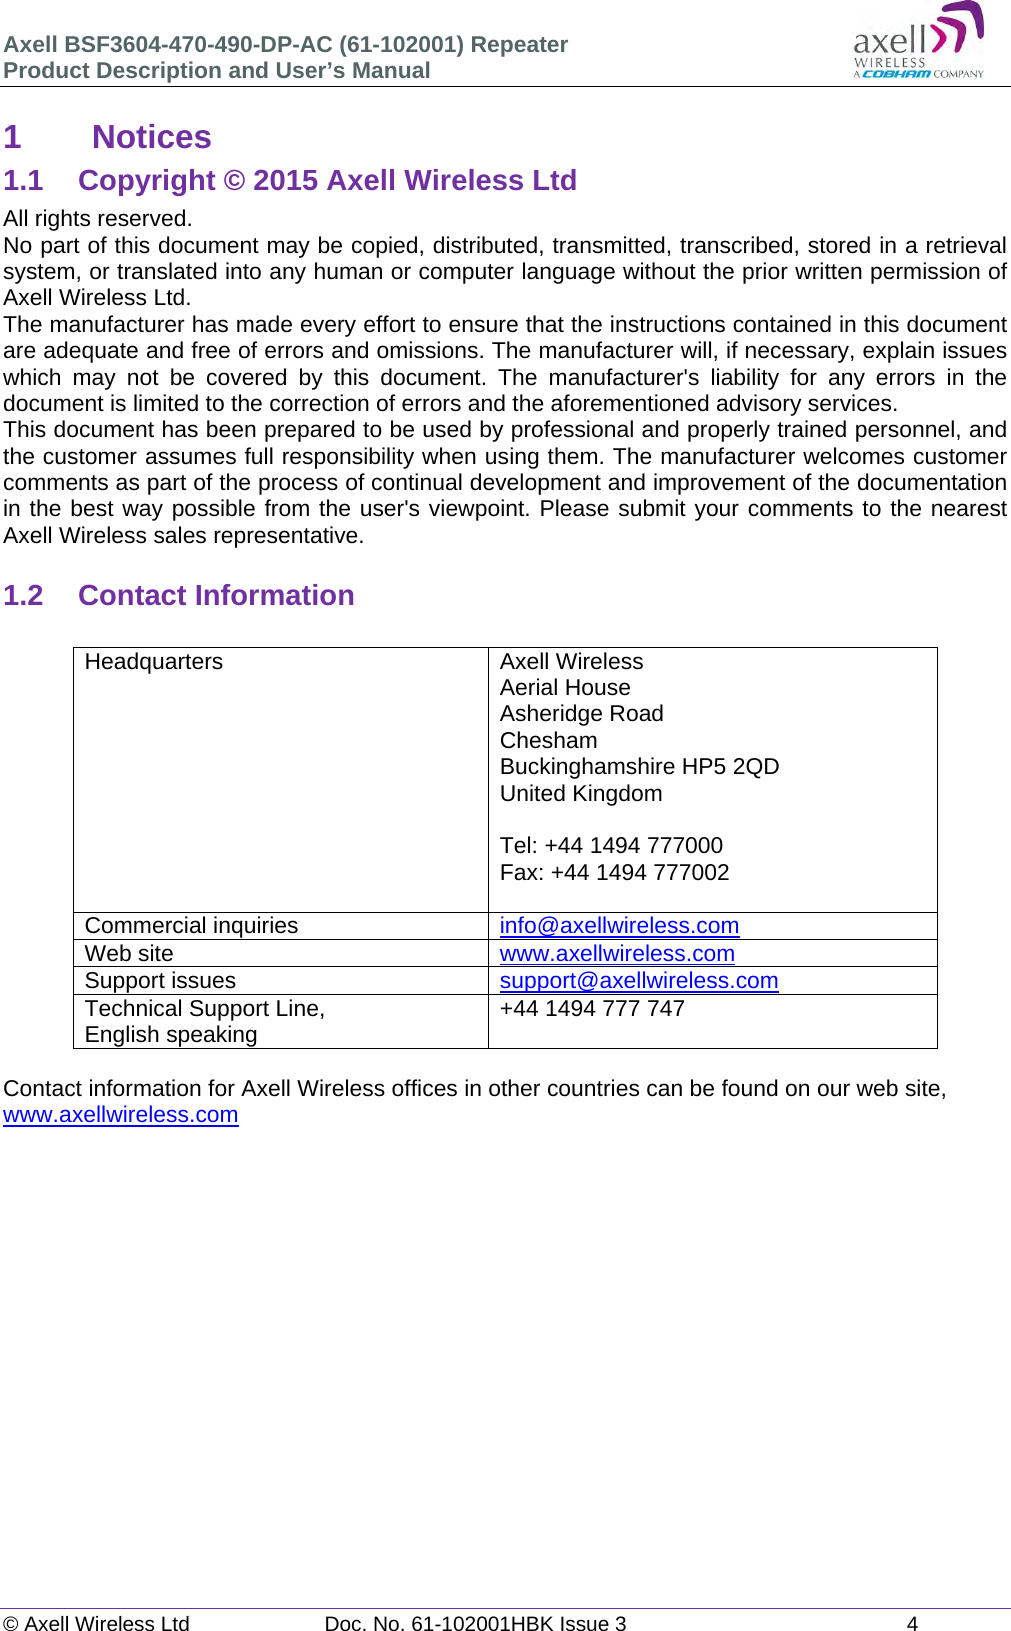 Axell BSF3604-470-490-DP-AC (61-102001) Repeater Product Description and User’s Manual © Axell Wireless Ltd  Doc. No. 61-102001HBK Issue 3  4   1 Notices 1.1  Copyright © 2015 Axell Wireless Ltd All rights reserved. No part of this document may be copied, distributed, transmitted, transcribed, stored in a retrieval system, or translated into any human or computer language without the prior written permission of Axell Wireless Ltd. The manufacturer has made every effort to ensure that the instructions contained in this document are adequate and free of errors and omissions. The manufacturer will, if necessary, explain issues which may not be covered by this document. The manufacturer&apos;s liability for any errors in the document is limited to the correction of errors and the aforementioned advisory services. This document has been prepared to be used by professional and properly trained personnel, and the customer assumes full responsibility when using them. The manufacturer welcomes customer comments as part of the process of continual development and improvement of the documentation in the best way possible from the user&apos;s viewpoint. Please submit your comments to the nearest Axell Wireless sales representative.  1.2 Contact Information  Headquarters Axell Wireless Aerial House  Asheridge Road  Chesham  Buckinghamshire HP5 2QD  United Kingdom   Tel: +44 1494 777000  Fax: +44 1494 777002   Commercial inquiries  info@axellwireless.com Web site  www.axellwireless.com Support issues  support@axellwireless.com Technical Support Line,  English speaking  +44 1494 777 747  Contact information for Axell Wireless offices in other countries can be found on our web site, www.axellwireless.com        